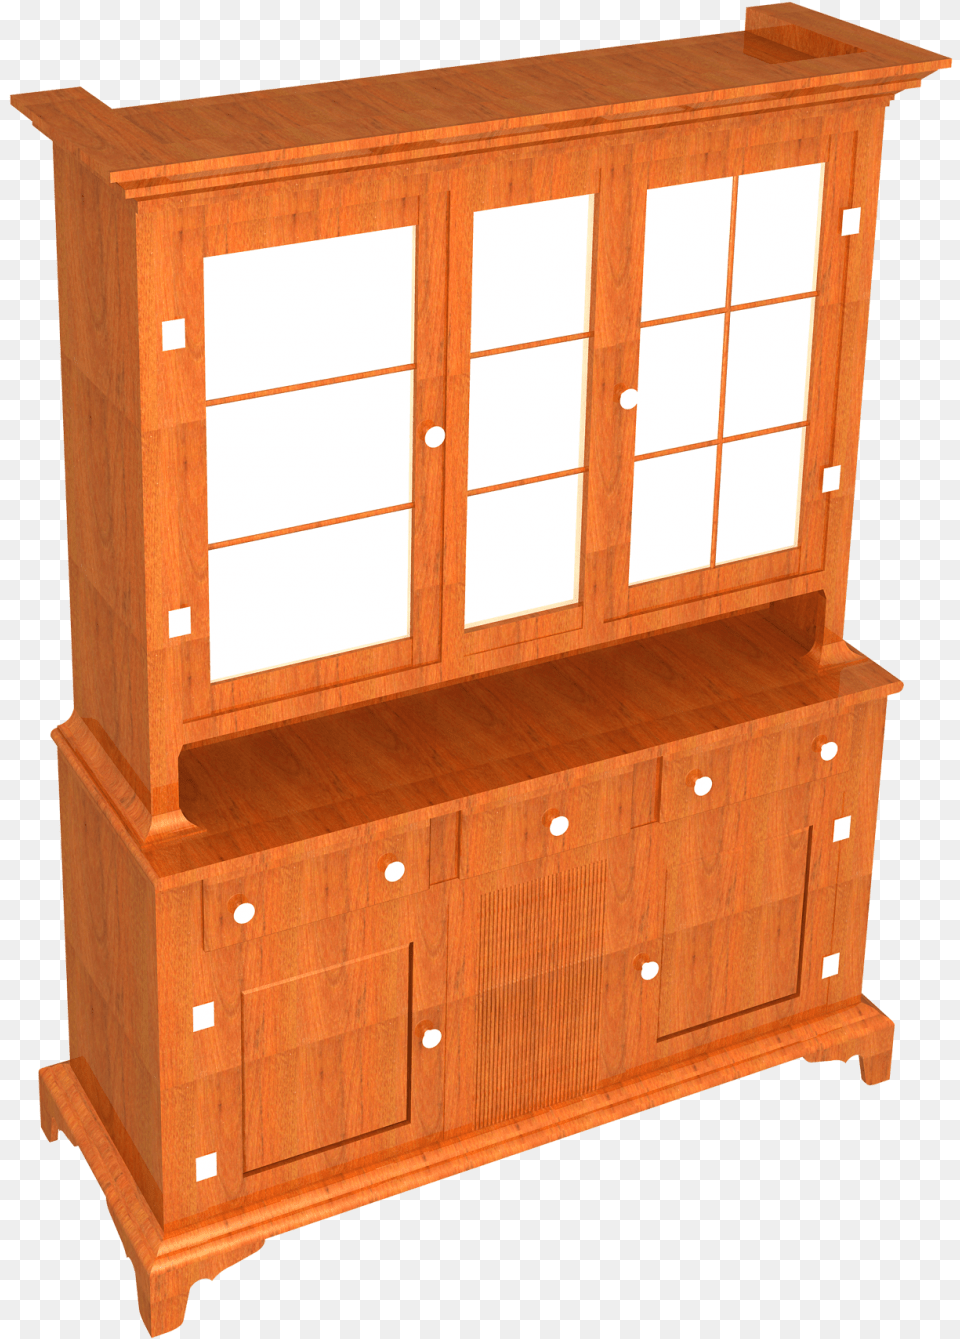 Kitchen Piece3d Viewclass Mw 100 Mh 100 Pol Align China Cabinet, Closet, Cupboard, Furniture, Sideboard Png Image